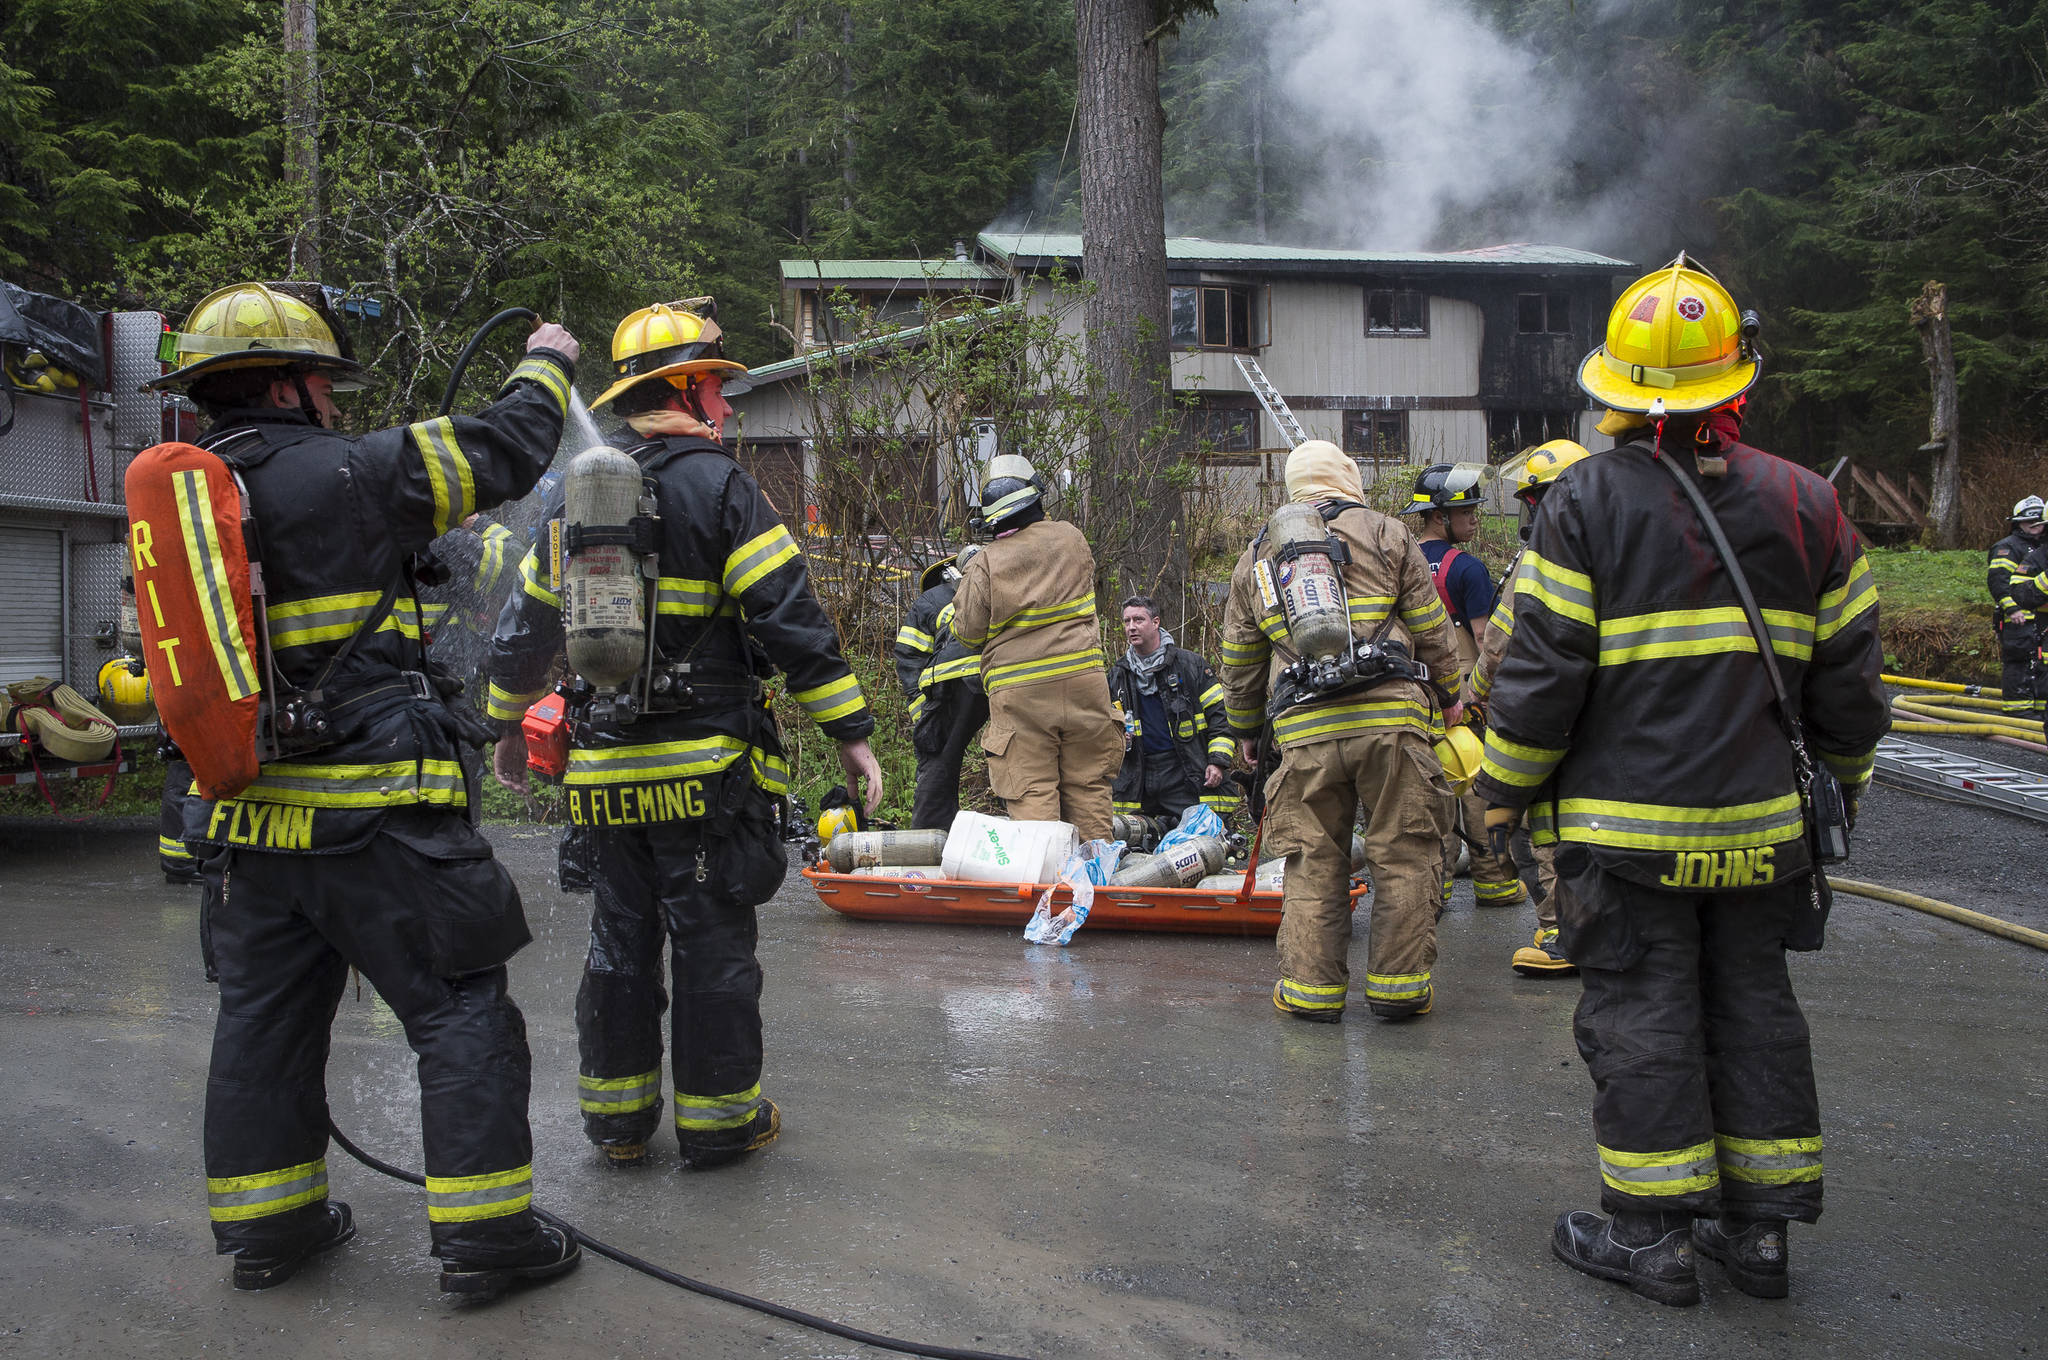 Capital City Fire/Rescue personnel respond to a house fire at 19140 Randall Road on Friday, May 11, 2018. According to Chuck Collins the house was recently bought by his daughter, Brooke, and her husband, Kevin Walker. Collins said the fire started in the attached apartment. (Michael Penn | Juneau Empire)